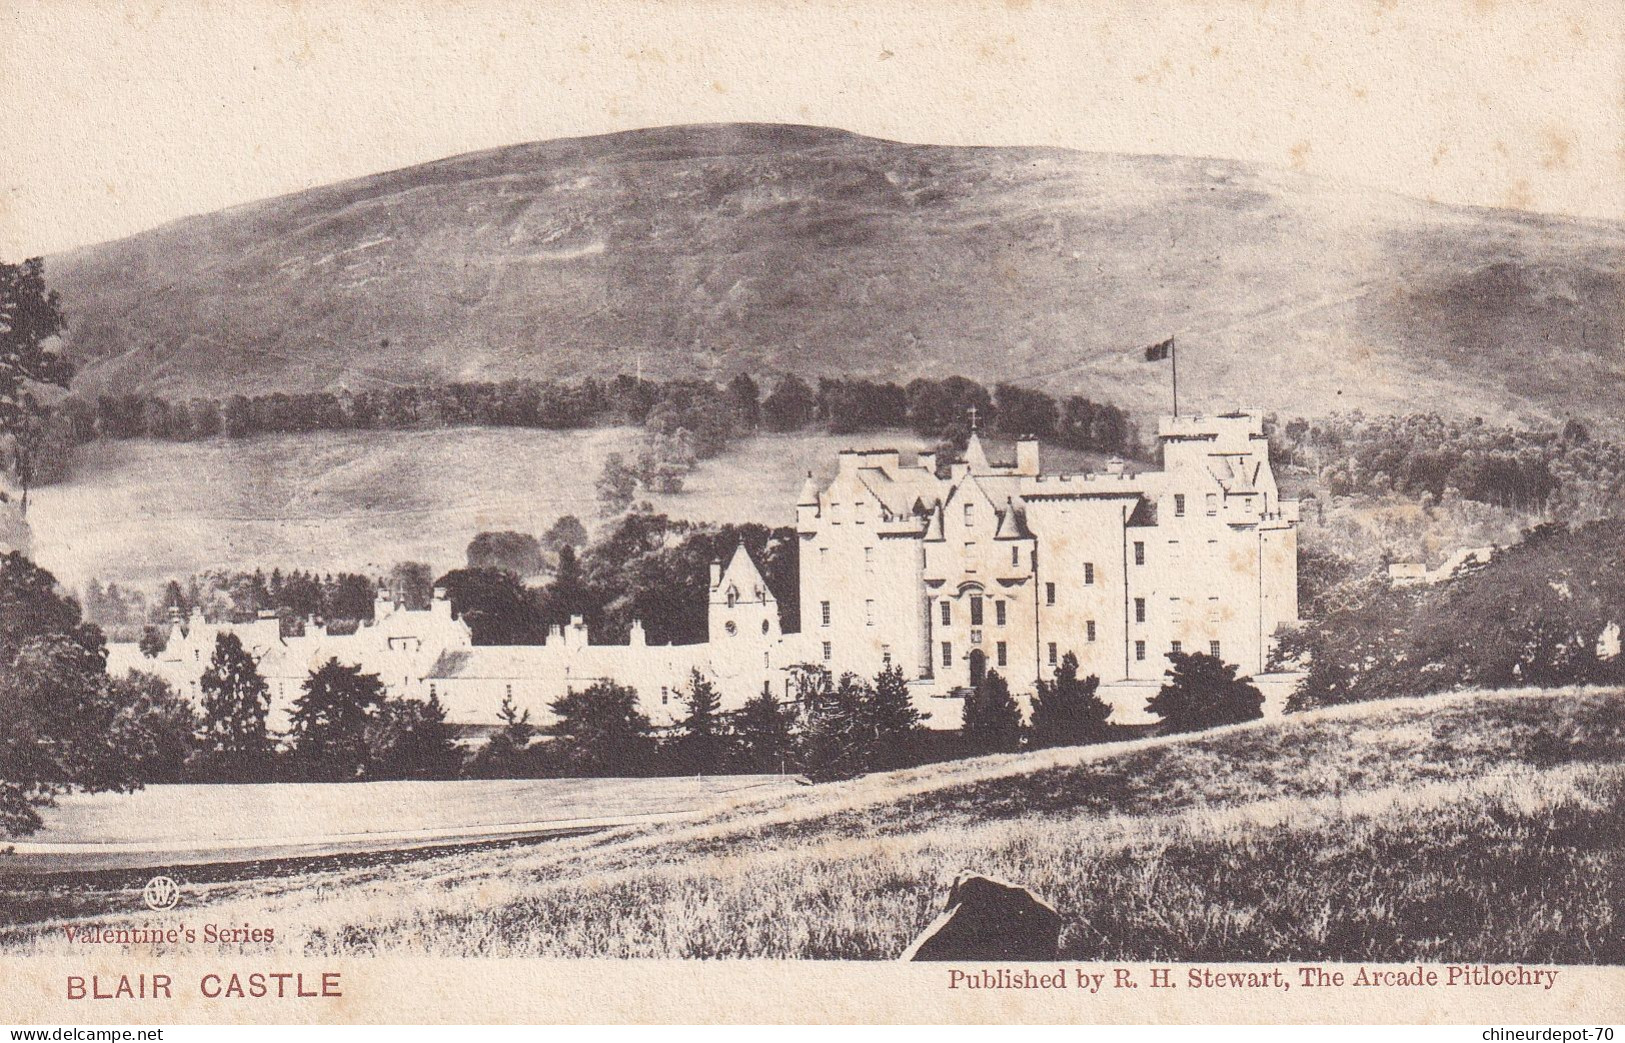 Valentine's Series BLAIR CASTLE Published By R. H. Stewart  The Arcade Pitlochry - Perthshire